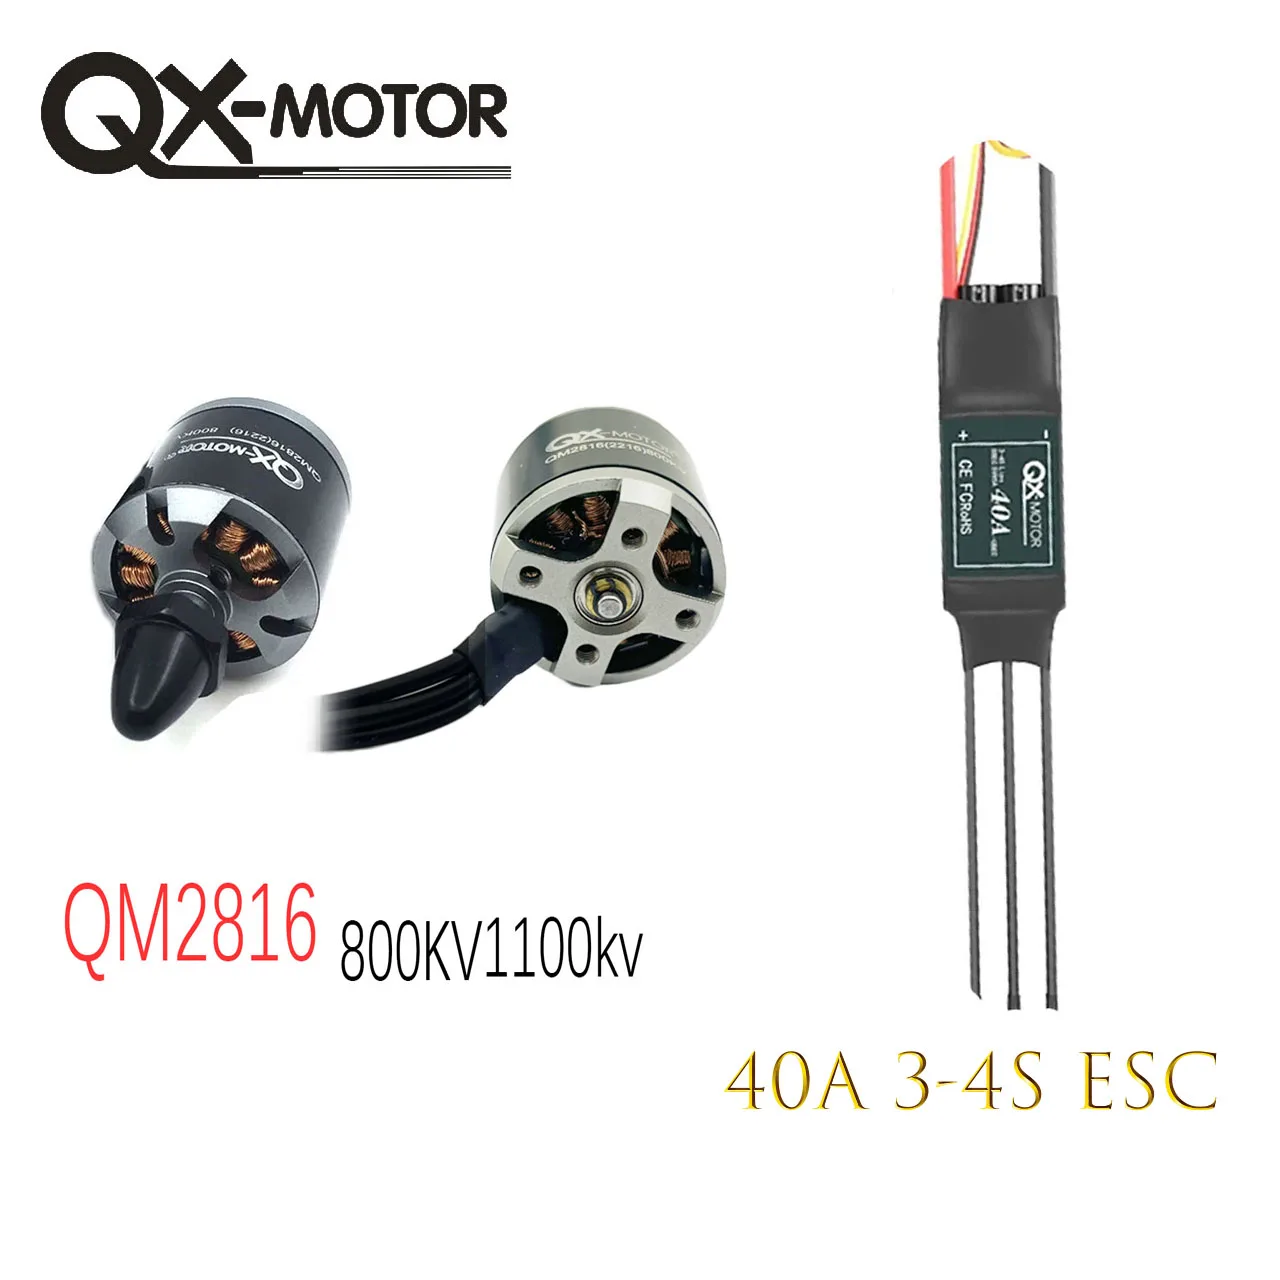 

QX -Motor Brushless Motor QM2816 (2216) -800KV 1100KV CW/CCW with 40A 4S ESC for Components of Multi Rotor Quadcopter